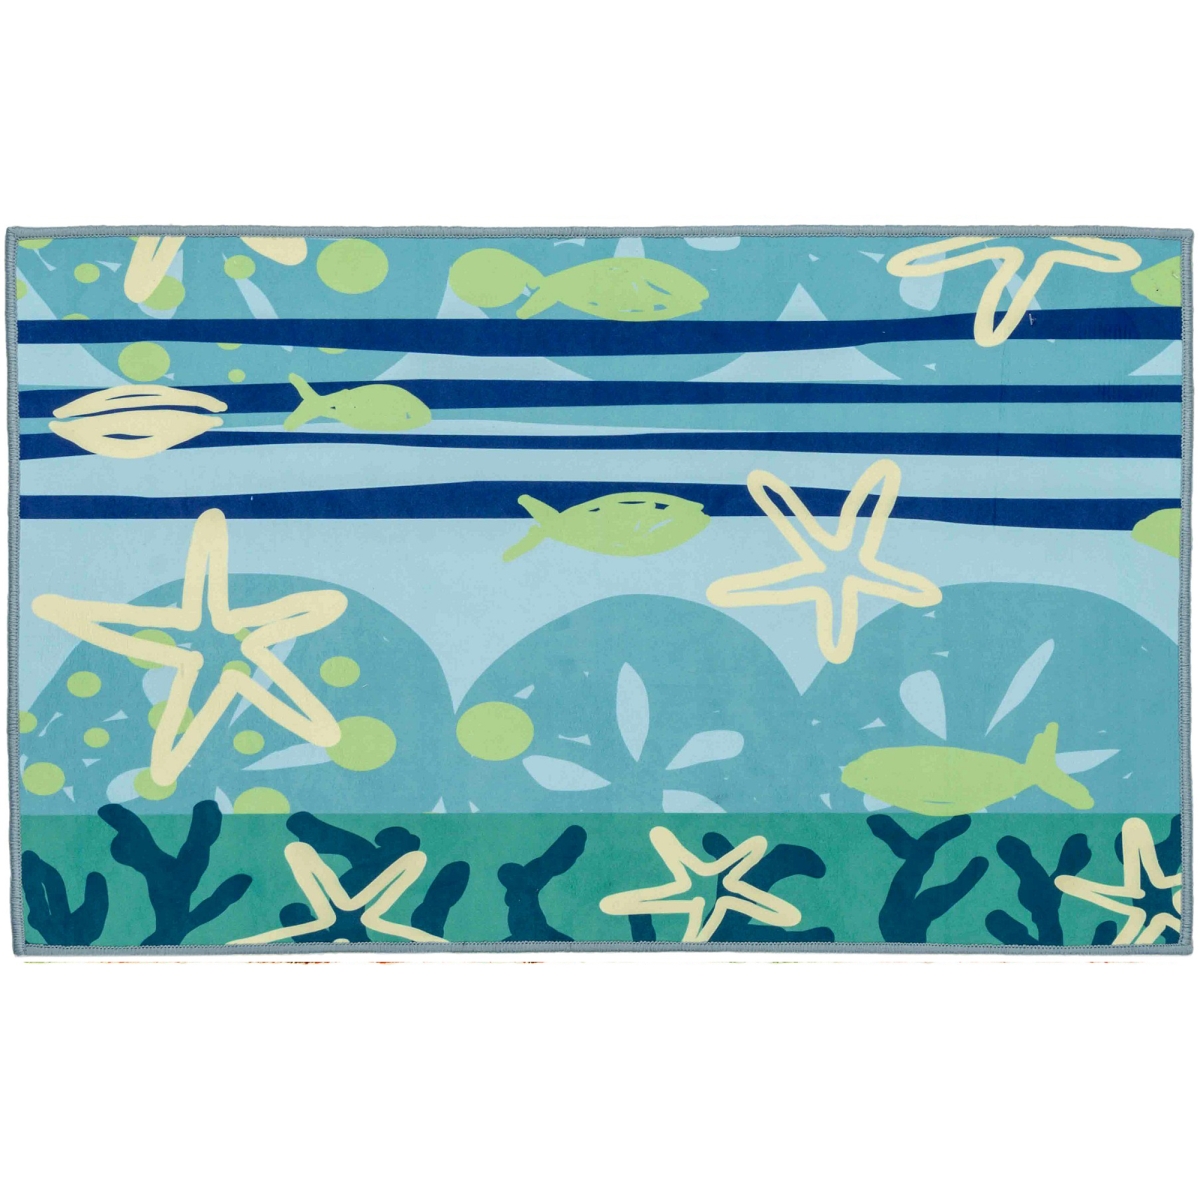 UPC 708793116020 product image for PR-AB001B 20 x 30 in. Ocean View Area Rug | upcitemdb.com